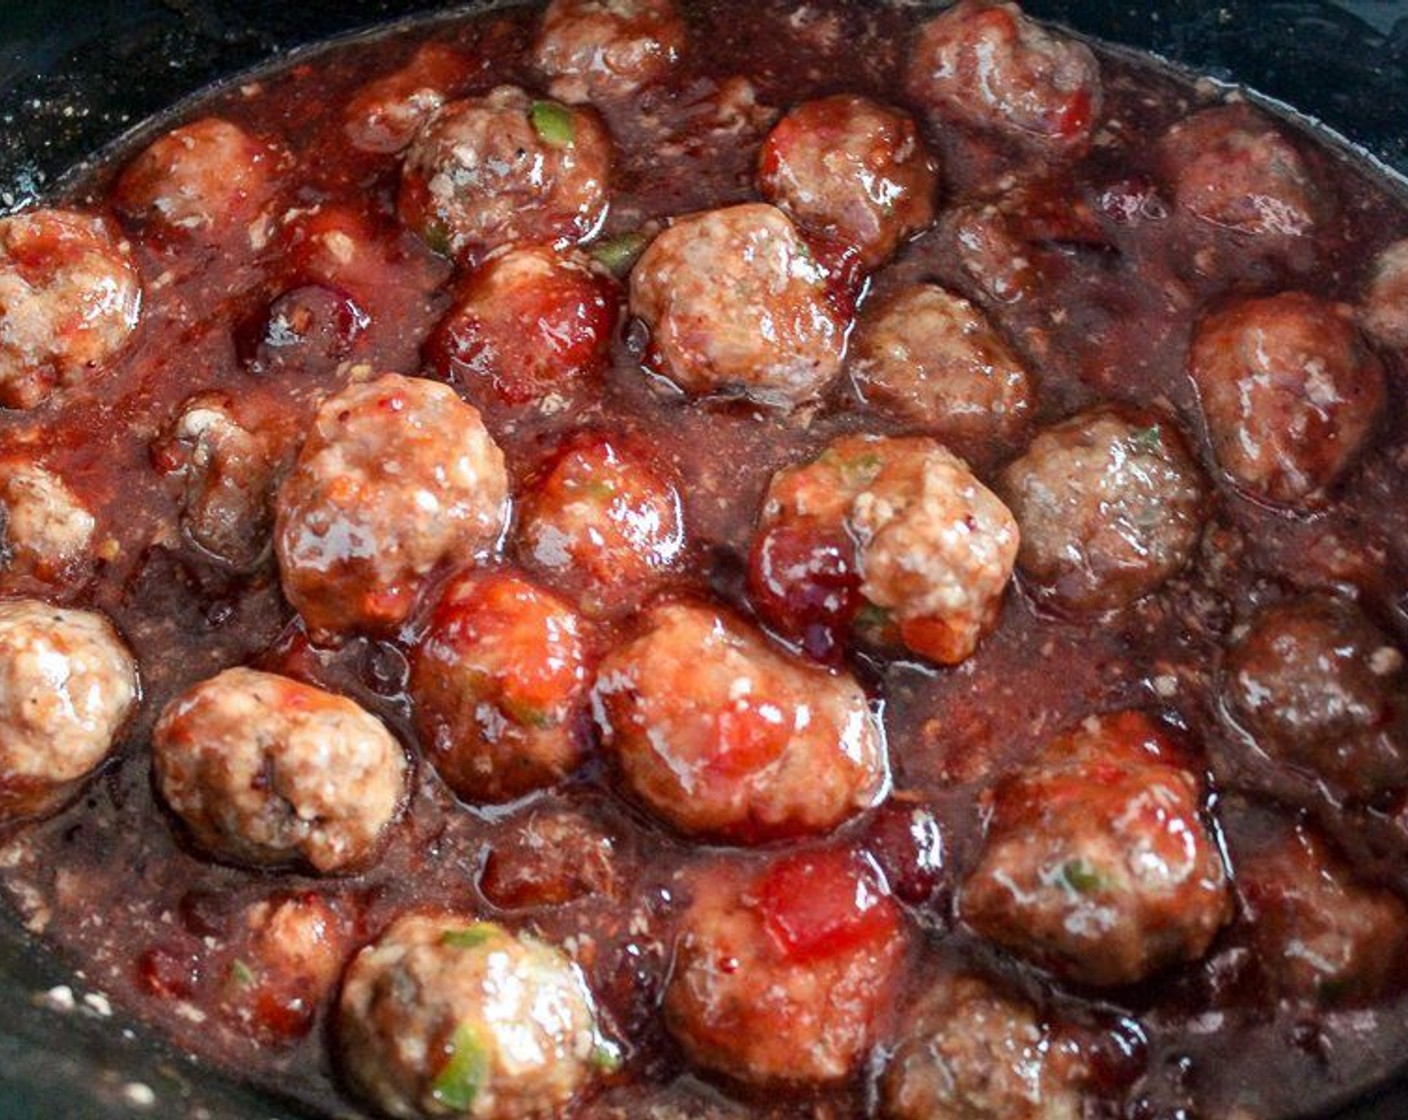 step 7 Add the meatballs warm or frozen. Cook on high for 1 hour, reduce heat to low and simmer for another hour.